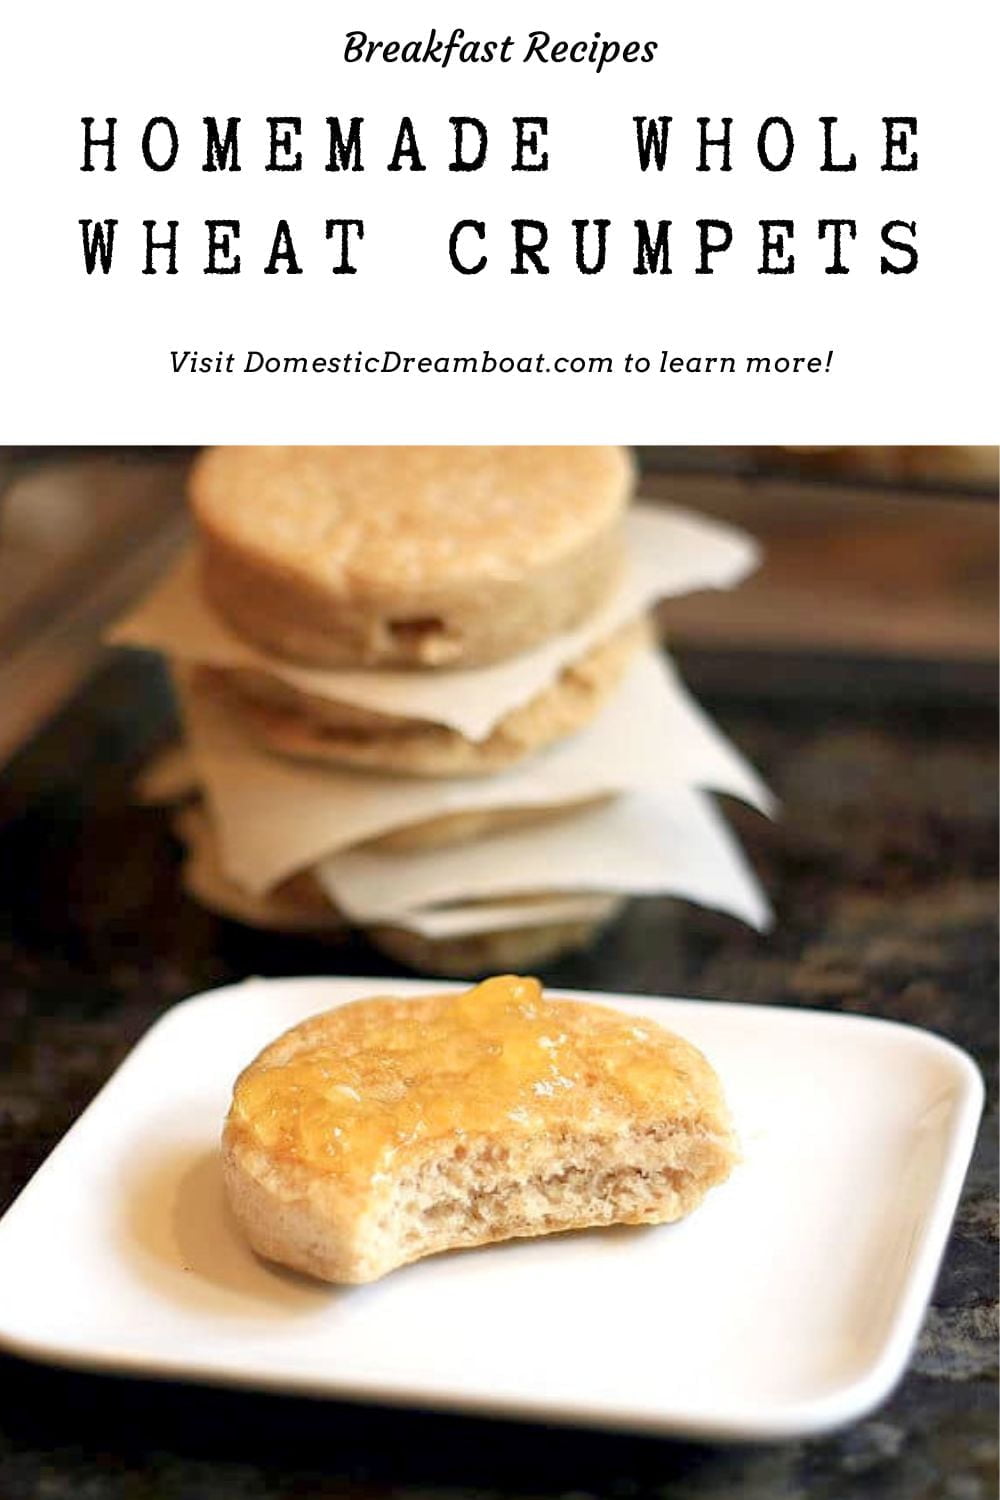 Homemade Whole Wheat Crumpets